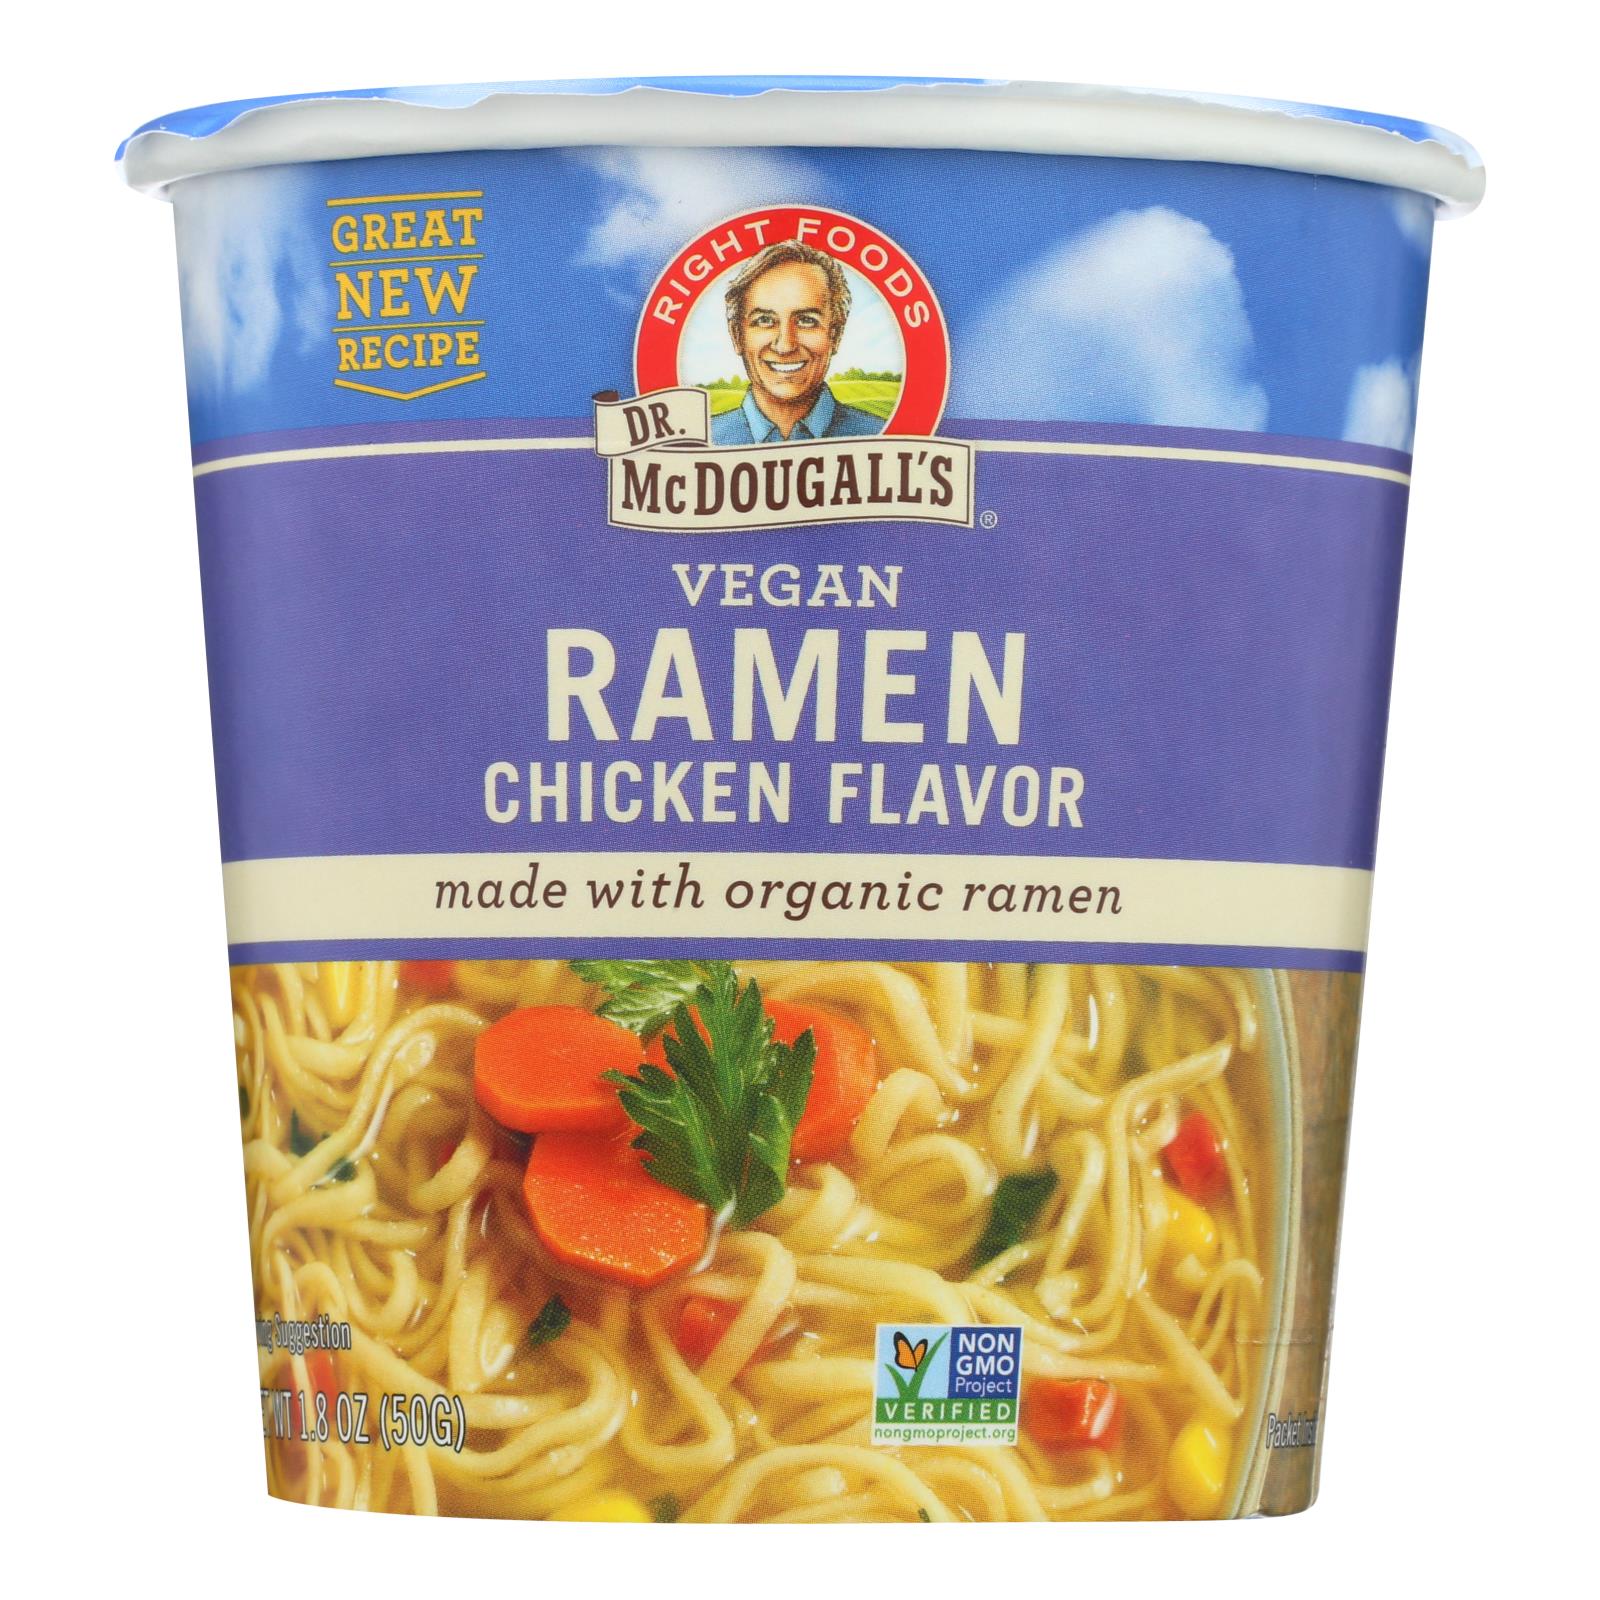 Dr. Mcdougall's Vegan Ramen Soup Big Cup With Noodles - Chicken - Case Of 6 - 1.8 Oz. - Whole Green Foods